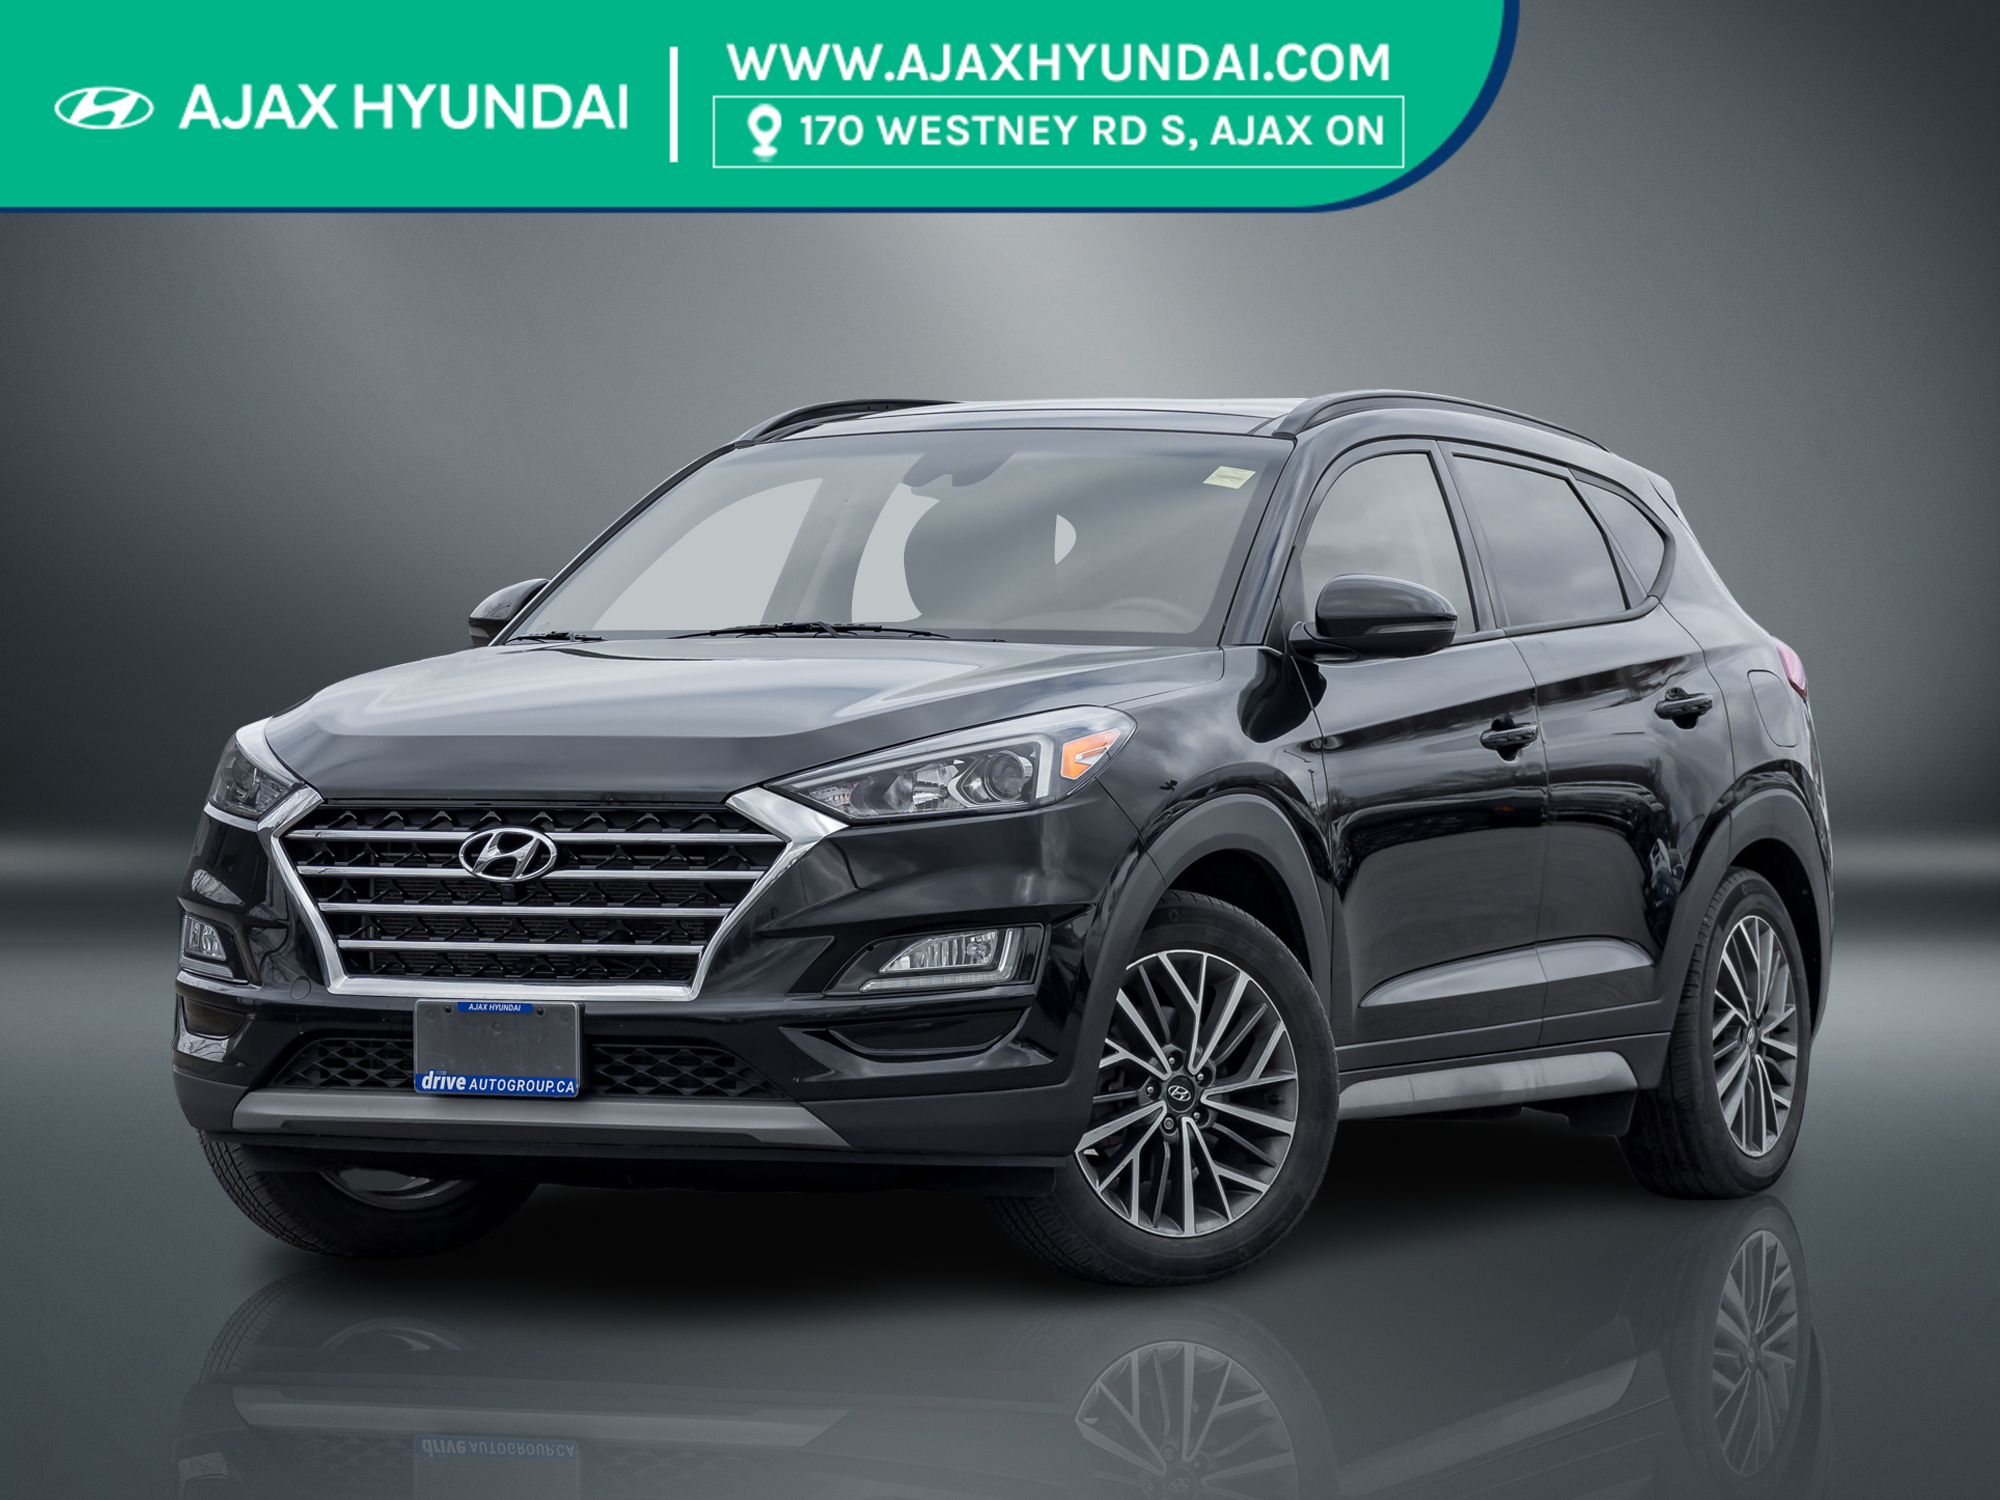 2019 Hyundai Tucson Luxury ONE OWNER NO ACCIDENT RATES FROM 4.99% ONE 